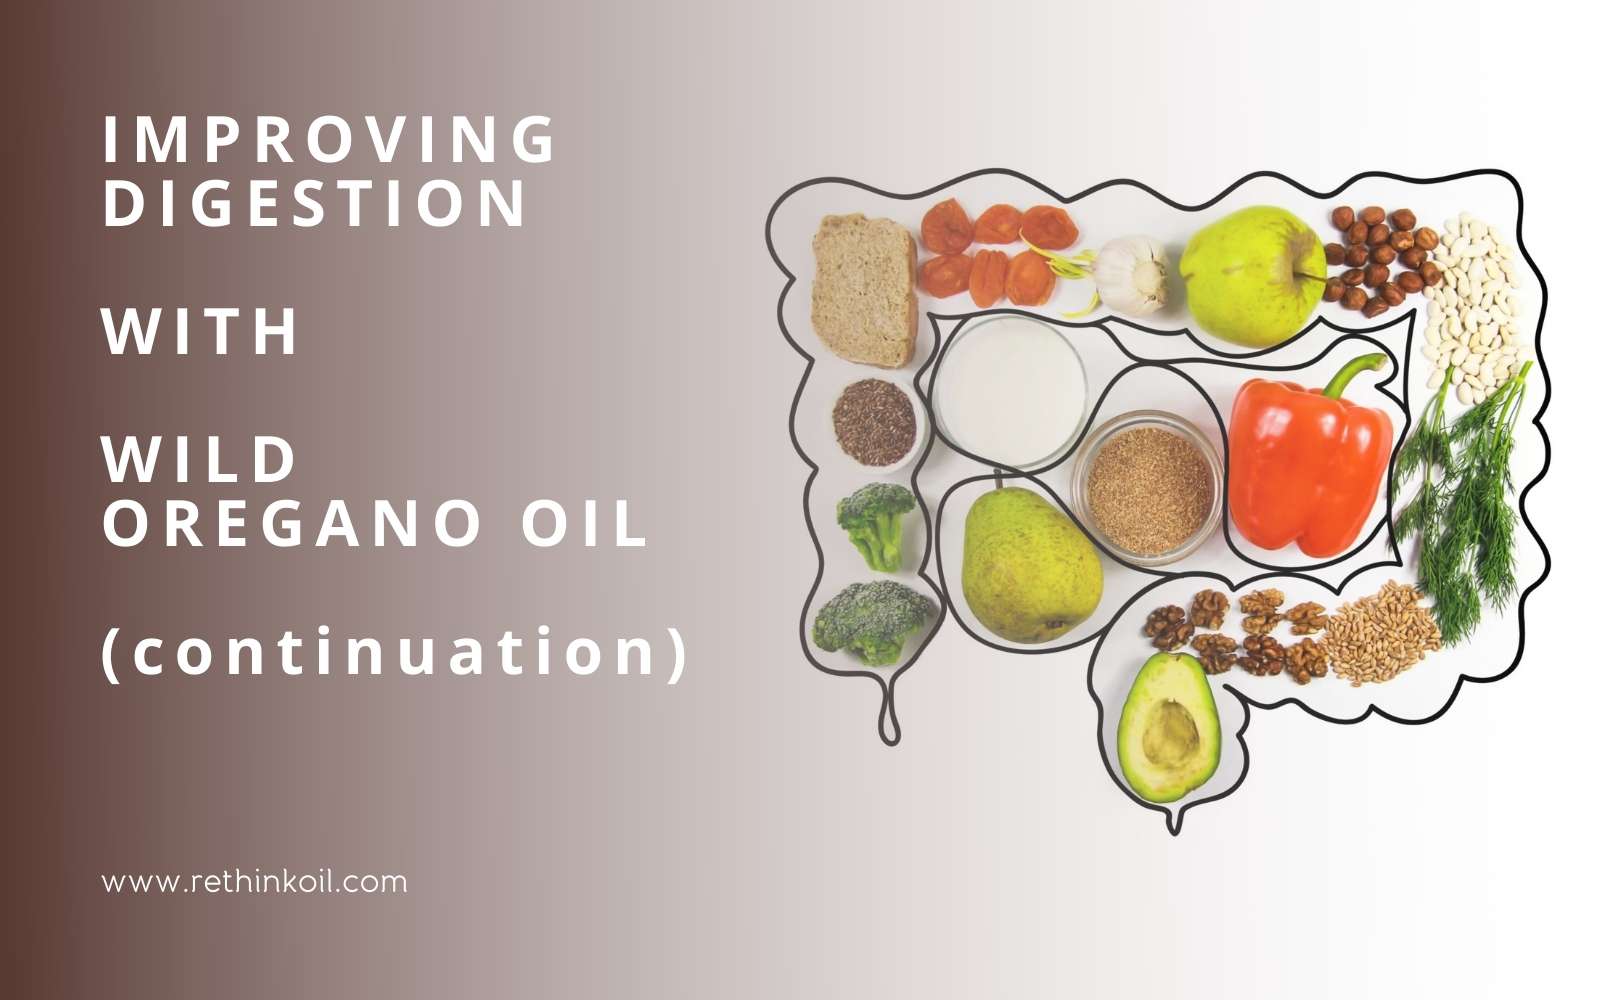 ReThinkOil Blog Improving Digestion with Wild Oregano Oil Continuation